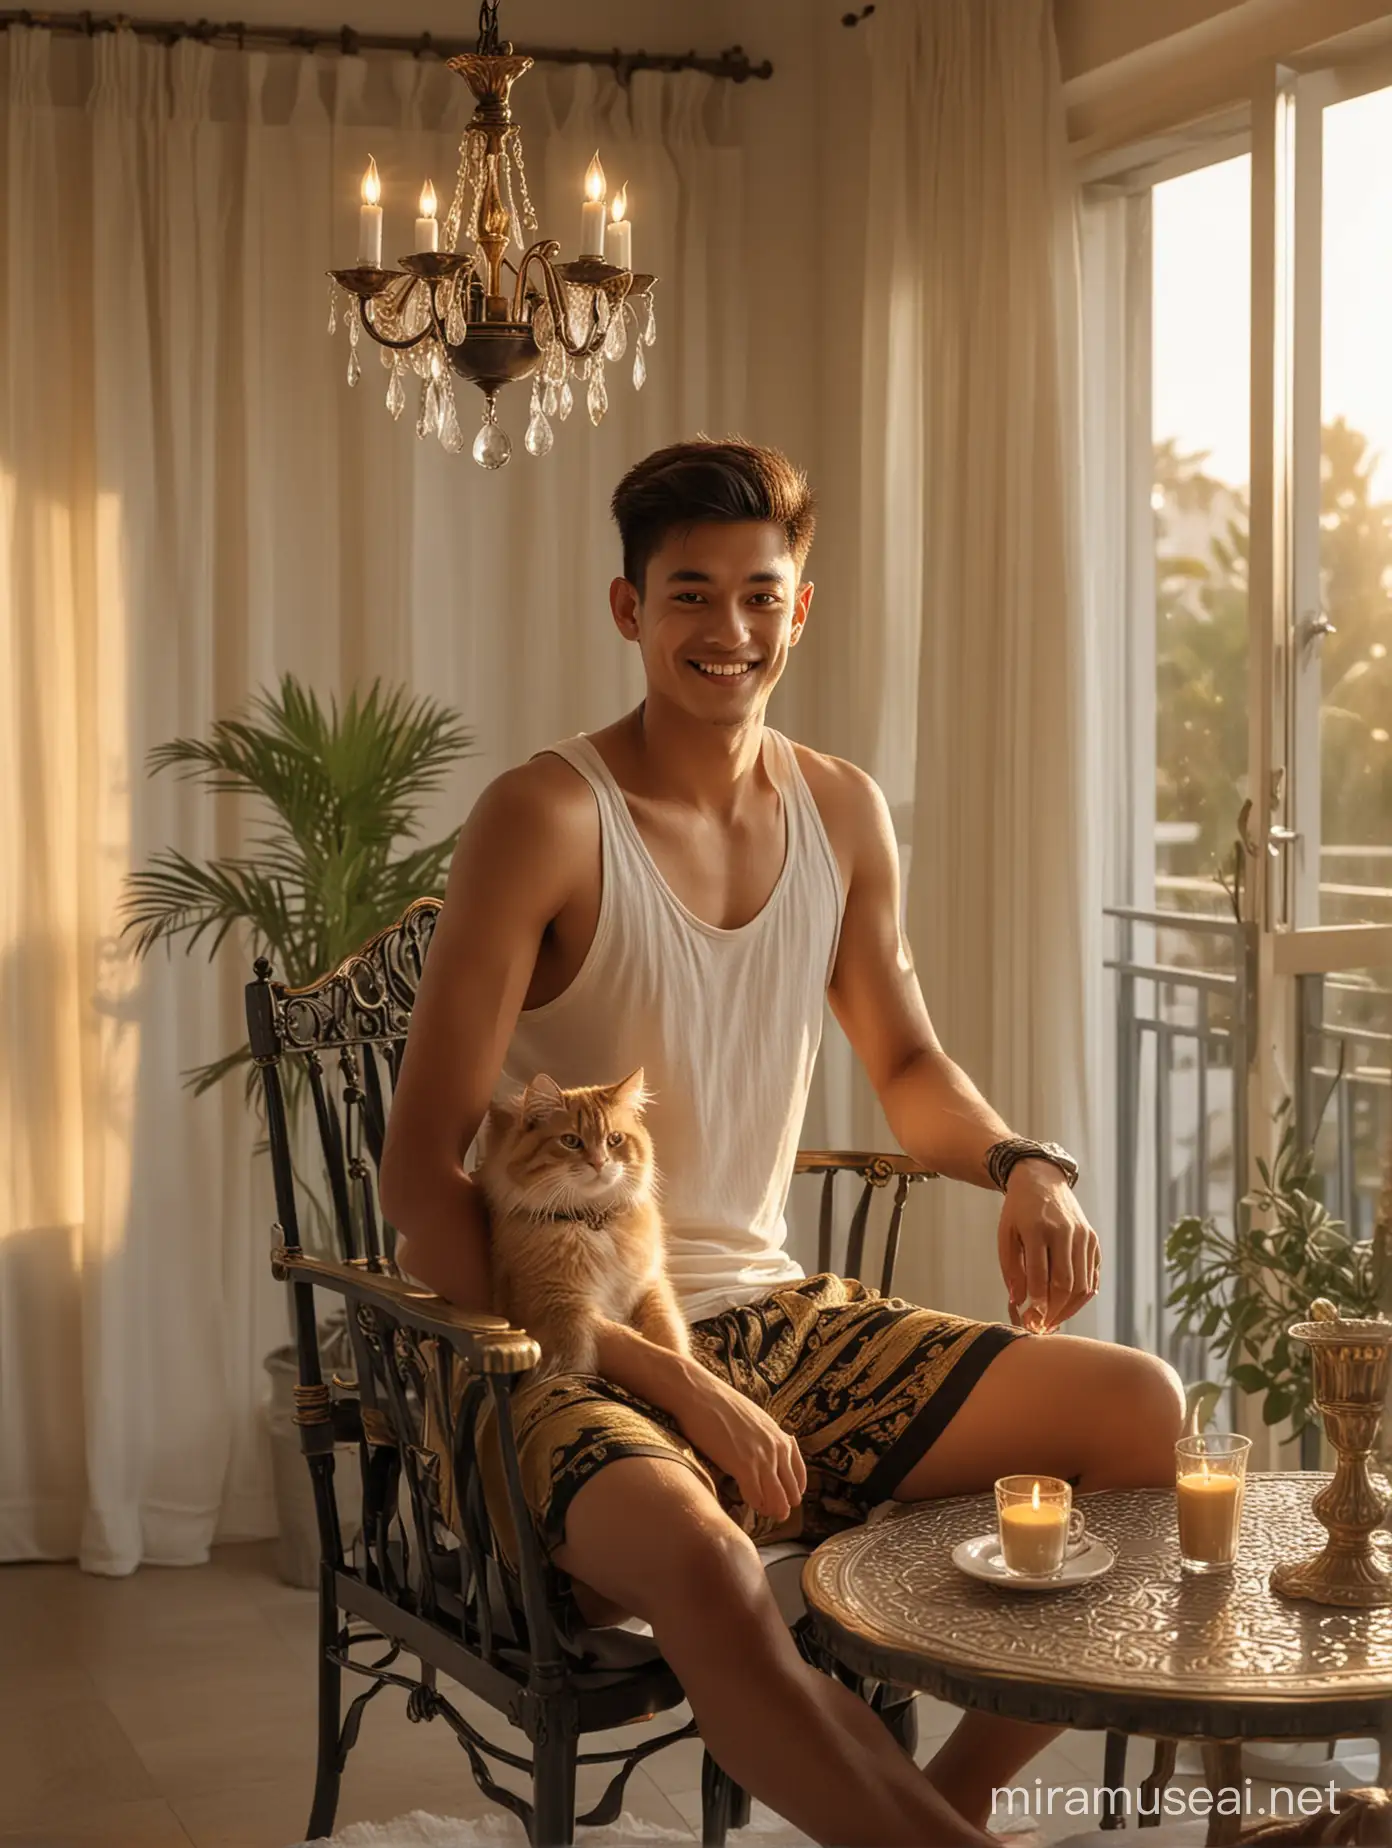 Luxurious Morning Handsome Man Relaxing with Persian Cat in Elegant Setting